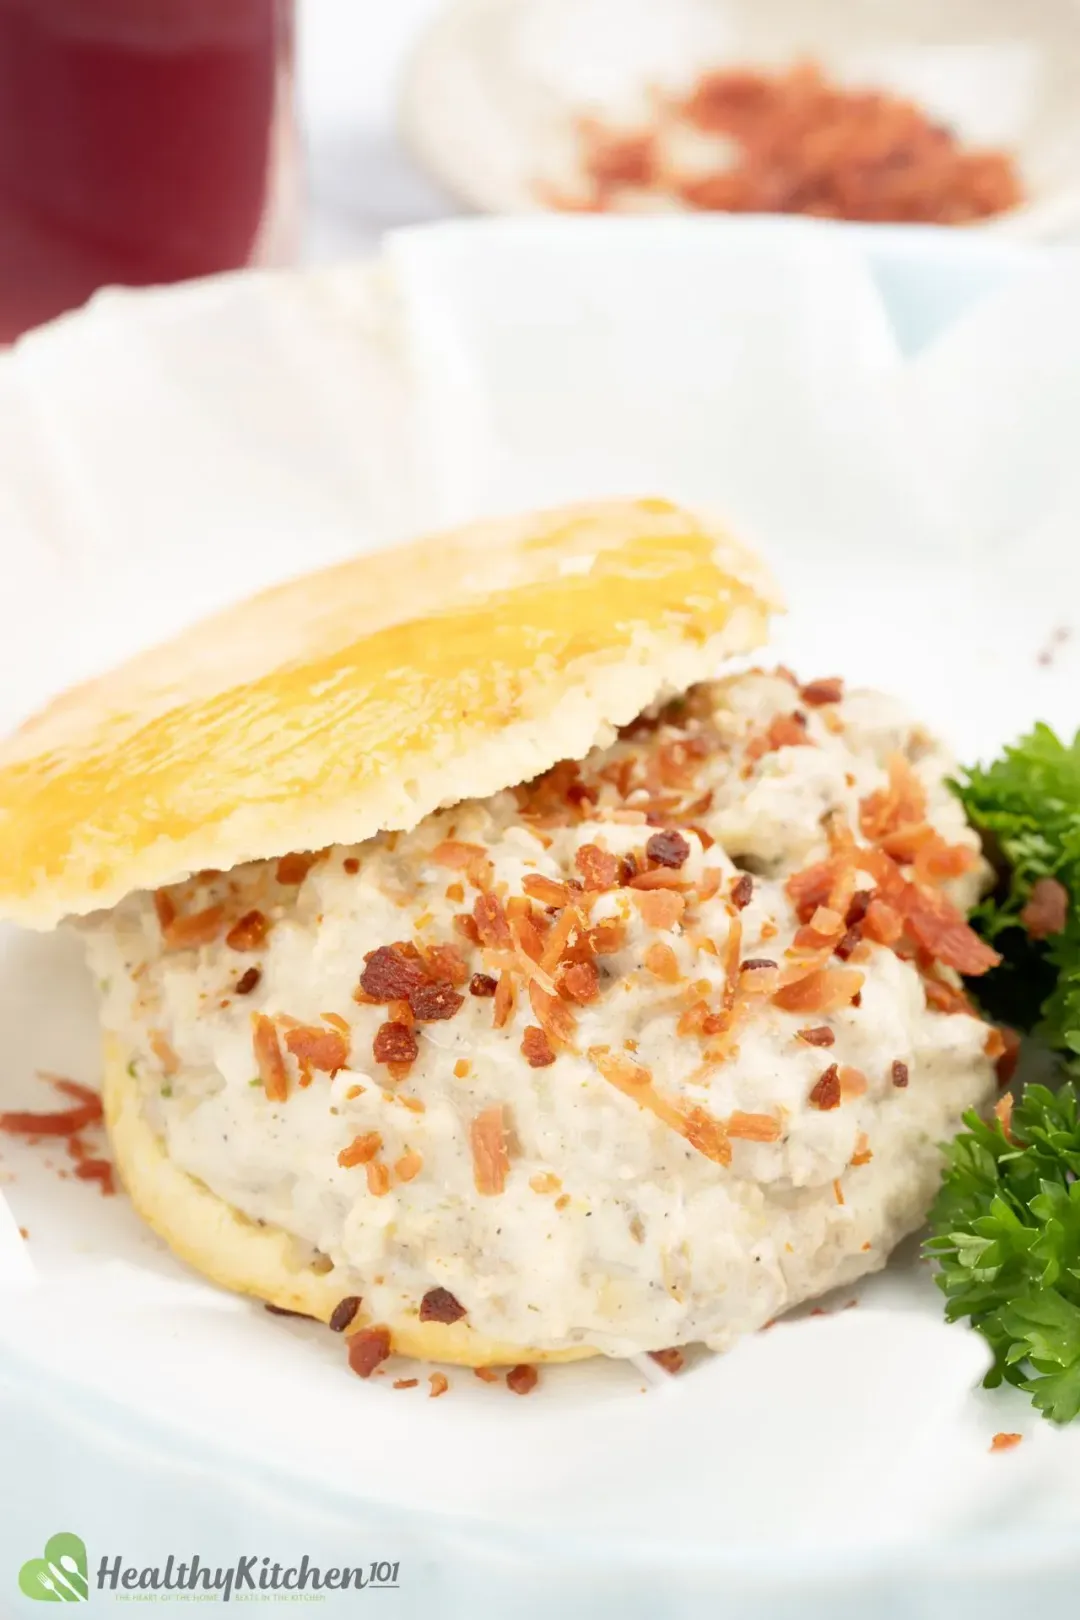 A heap of meaty gravy and bacon crumbles in between two biscuits, placed next to green parsley